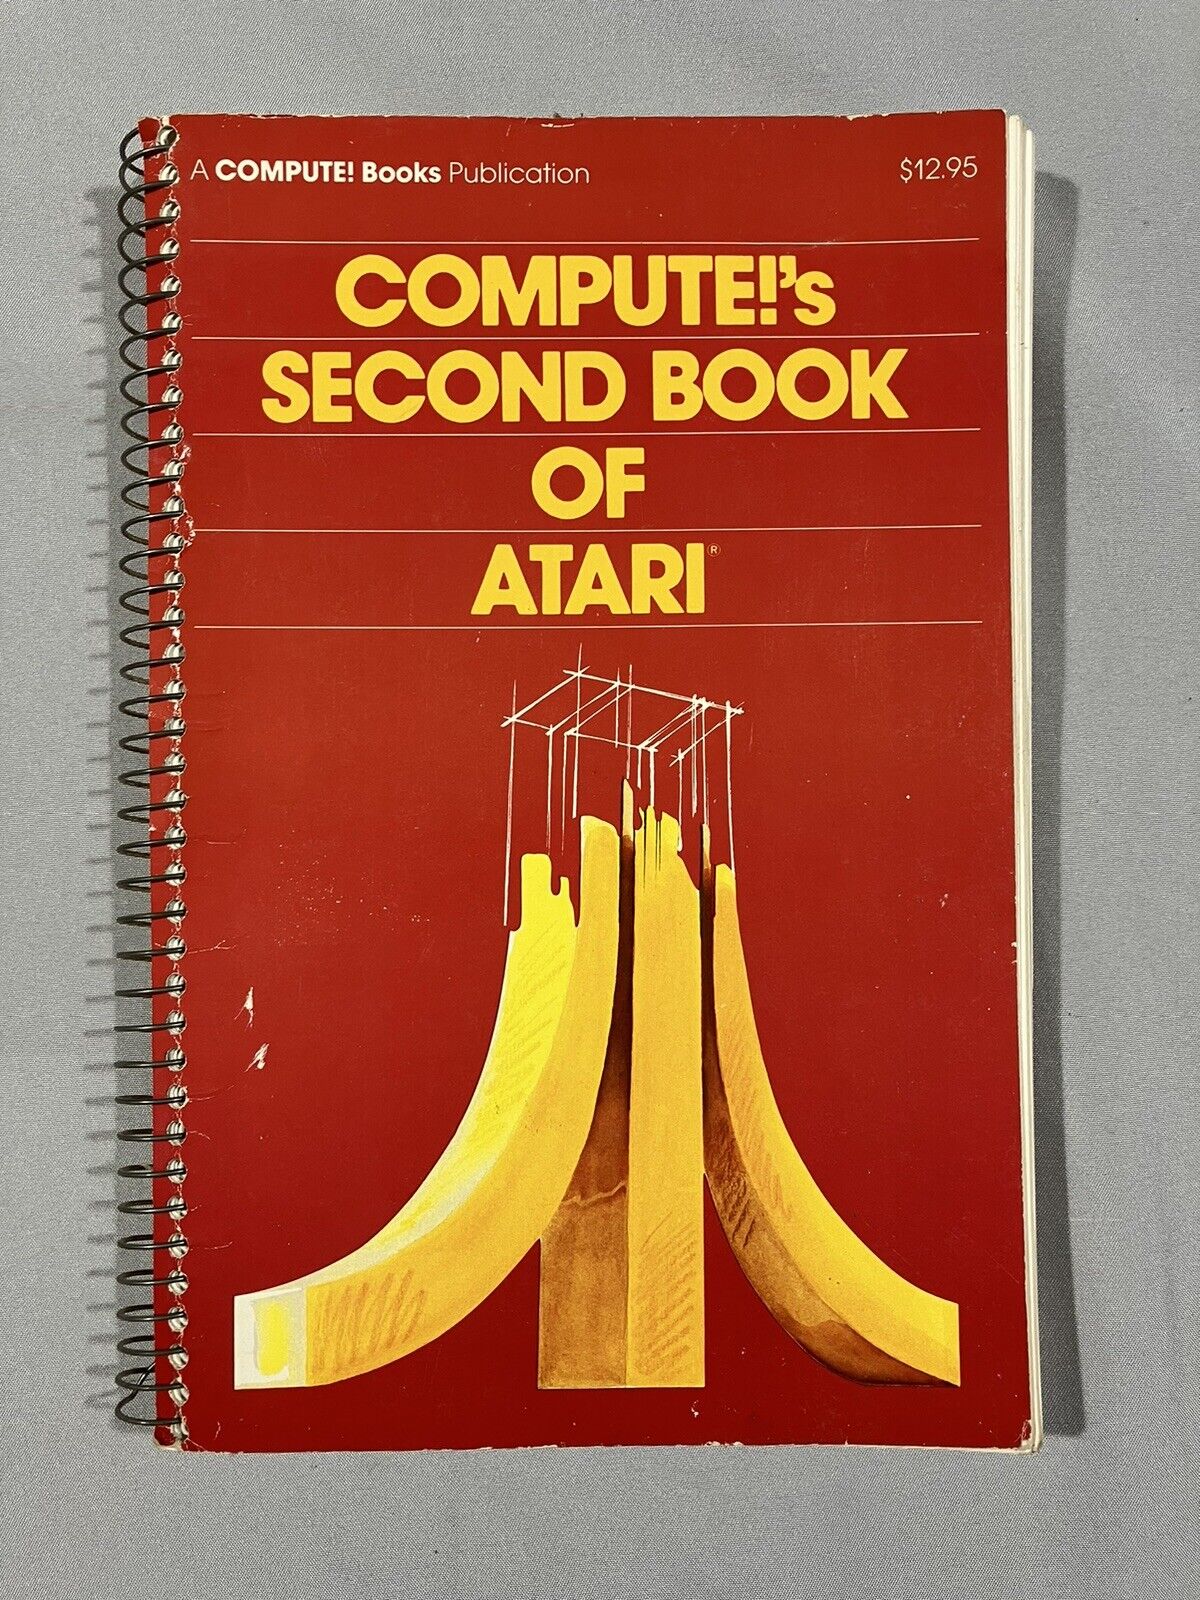 Vintage Compute's Second Book of Atari by Compute Books Published 1982